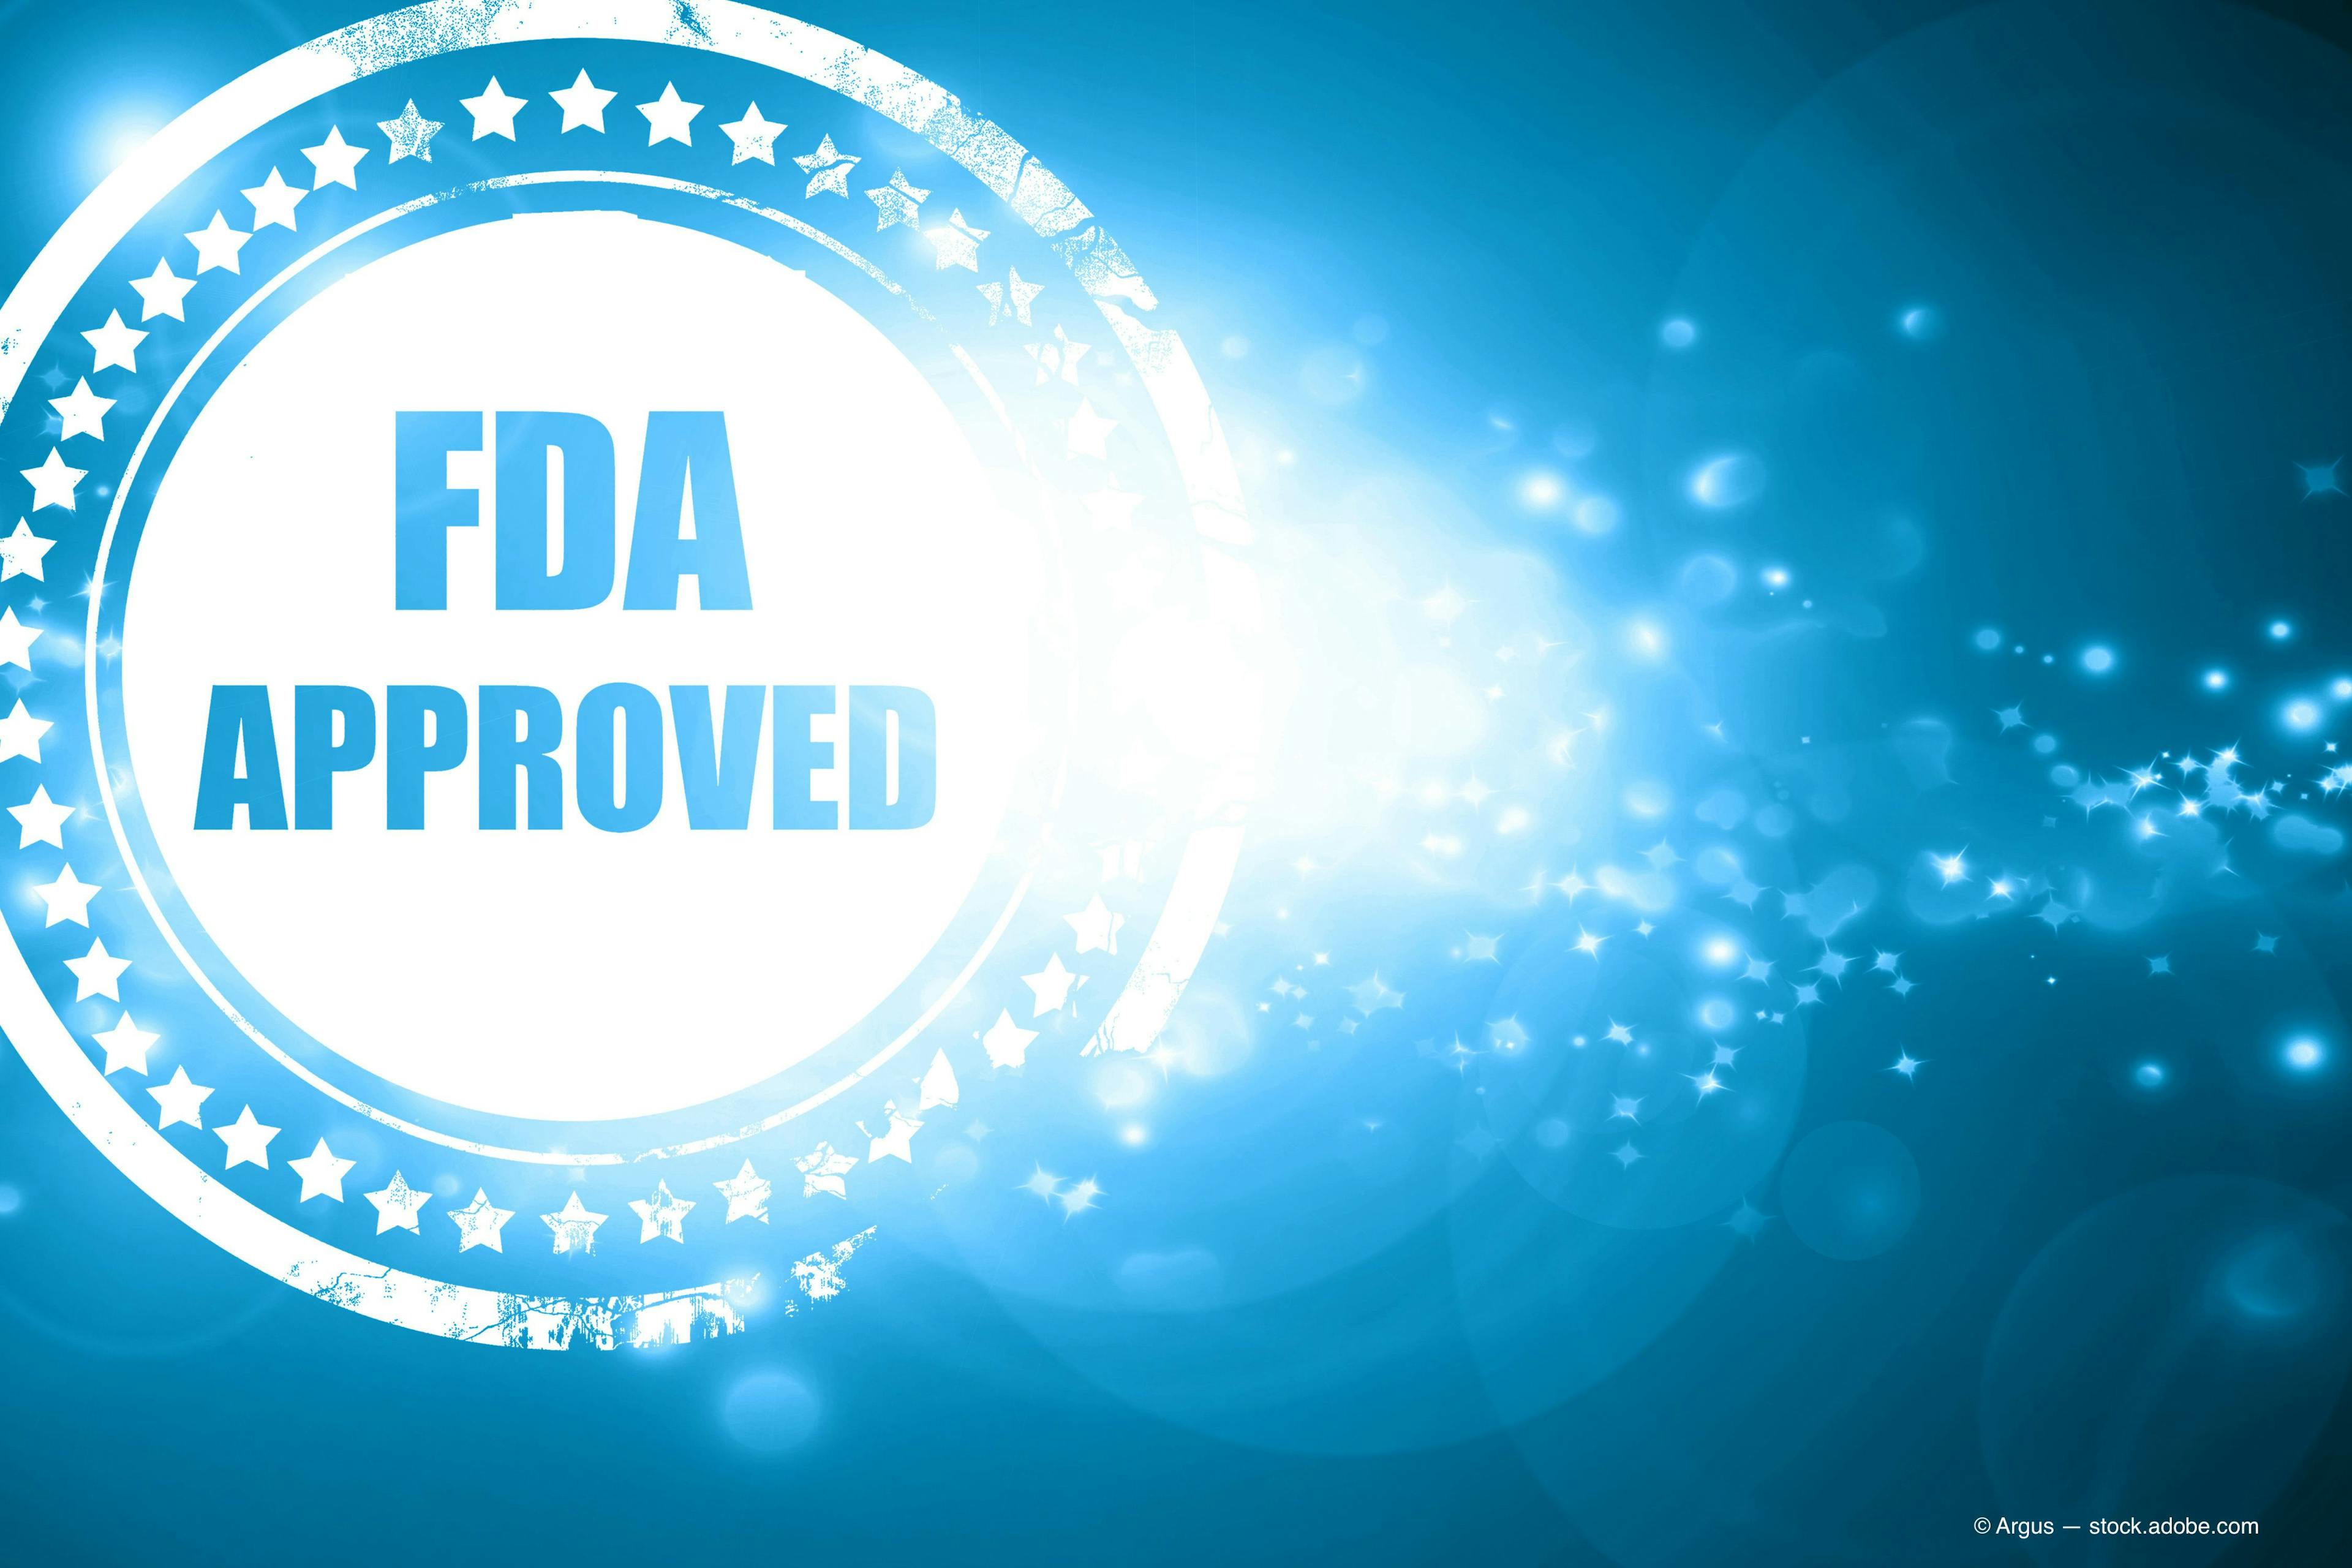 FDA approves brolucizumab-dbll 6 mg for DME treatment